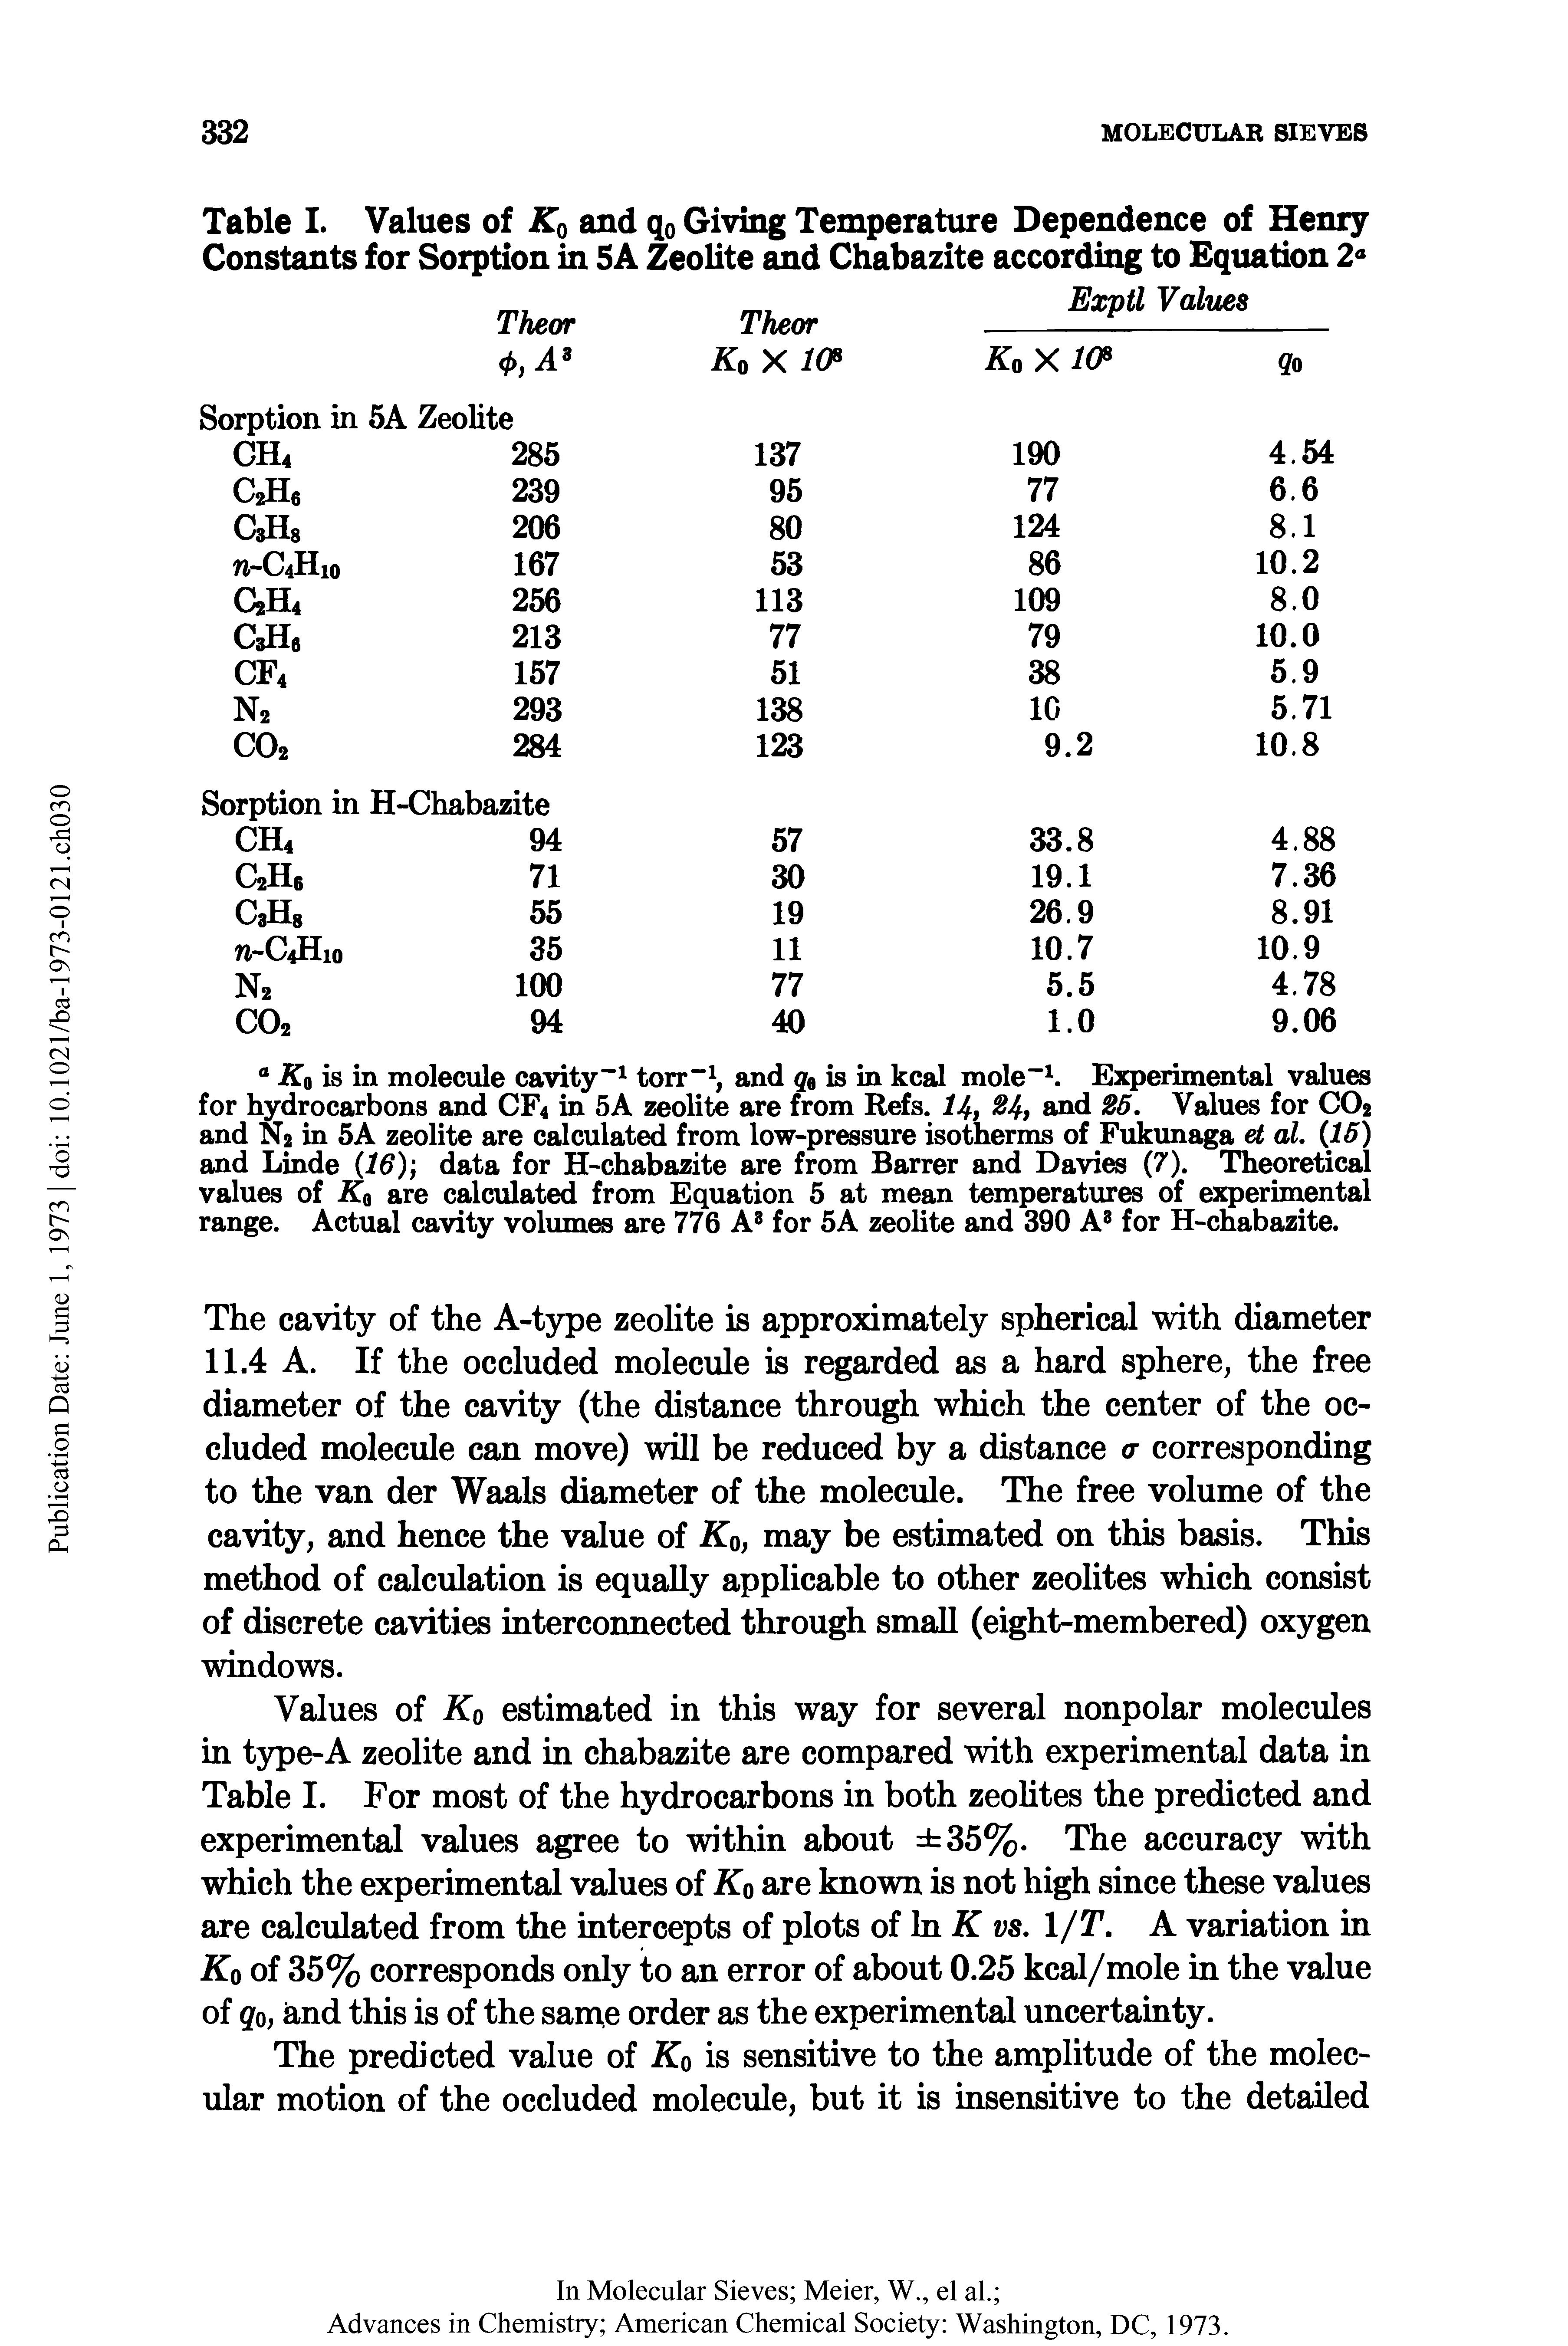 Table I. Values of Kq and q0 Giving Temperature Dependence of Henry Constants for Sorption in 5A Zeolite and Chabazite according to Equation 2 ...